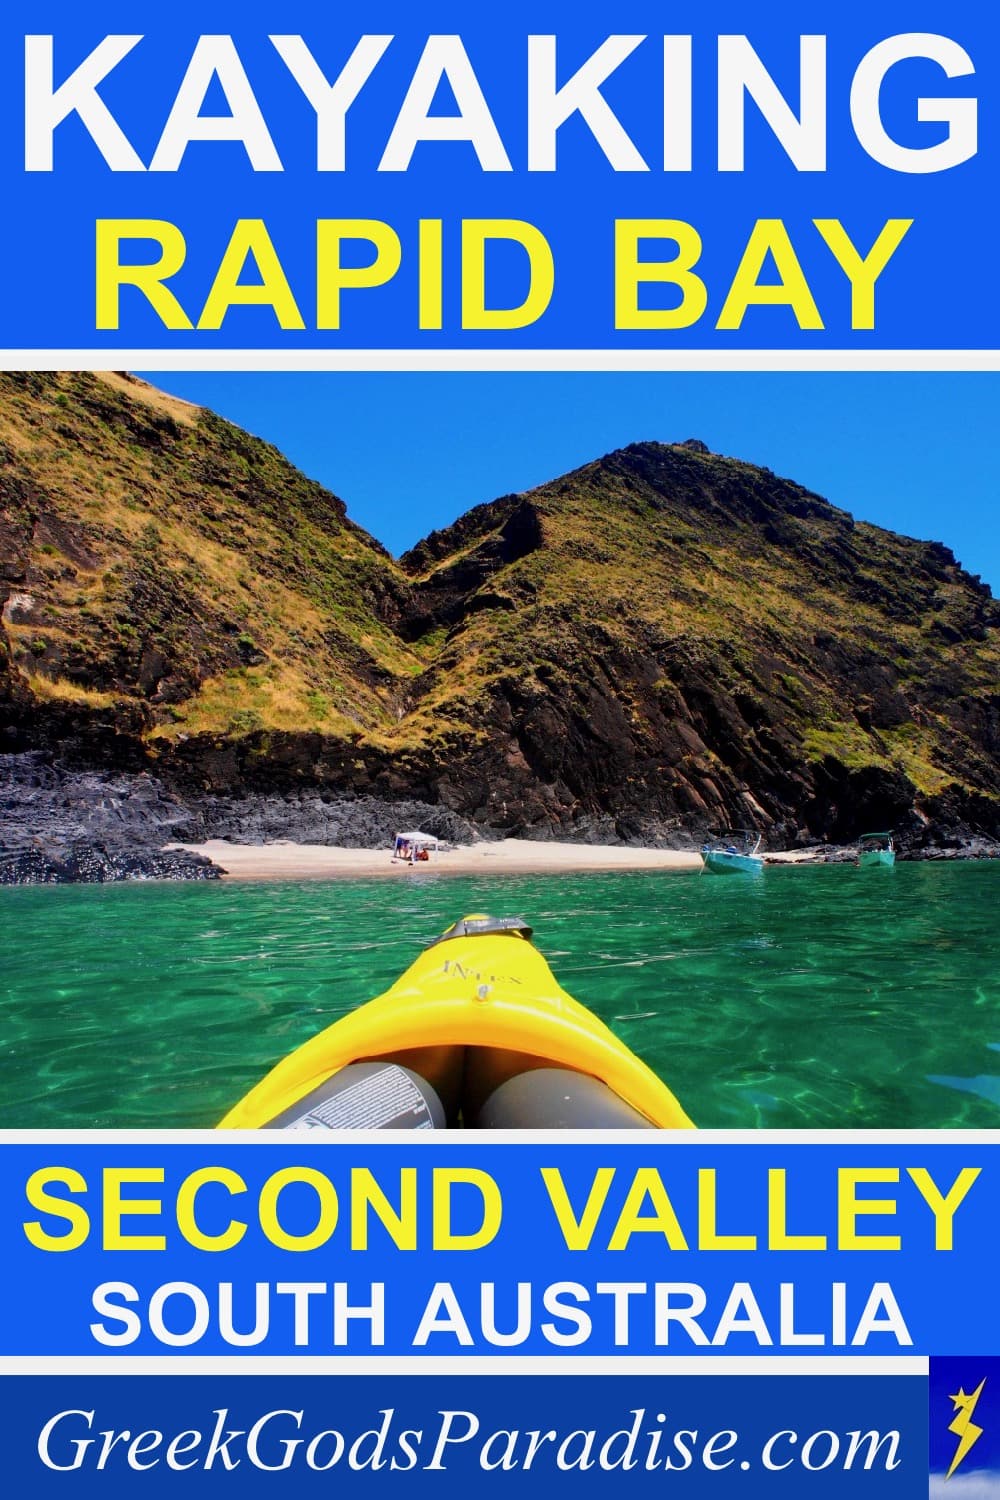 Kayaking Rapid Bay Second Valley South Australia